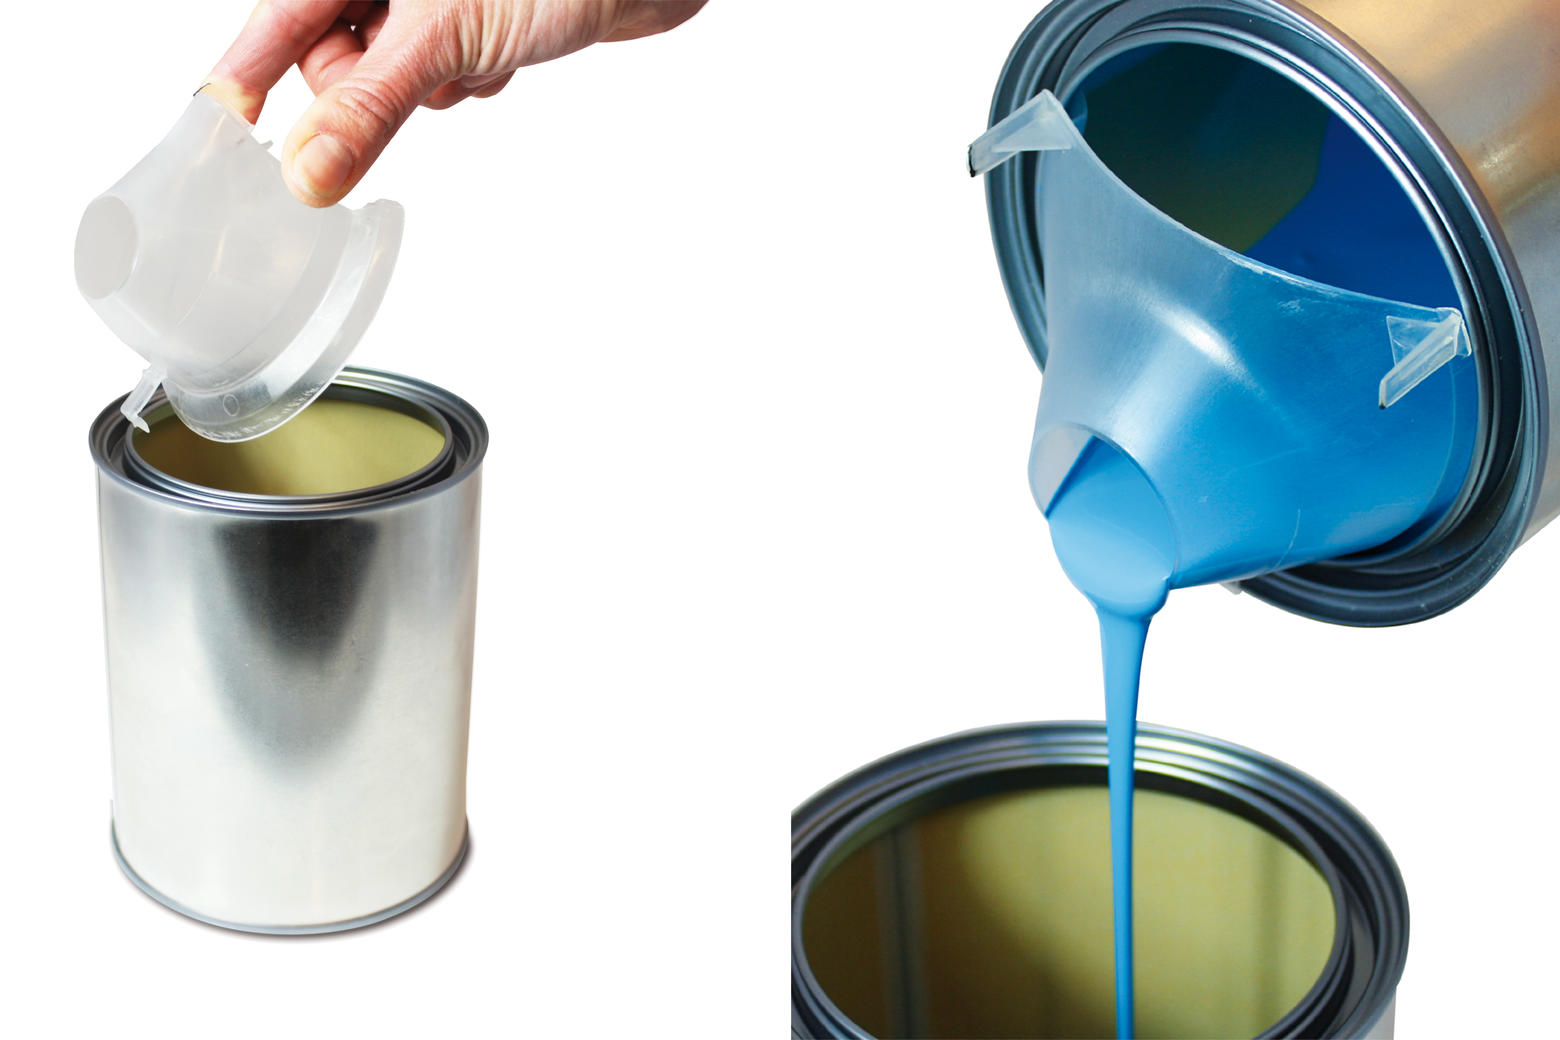 Totally emptying a paint can with a Pour and Go is very easy and clean.